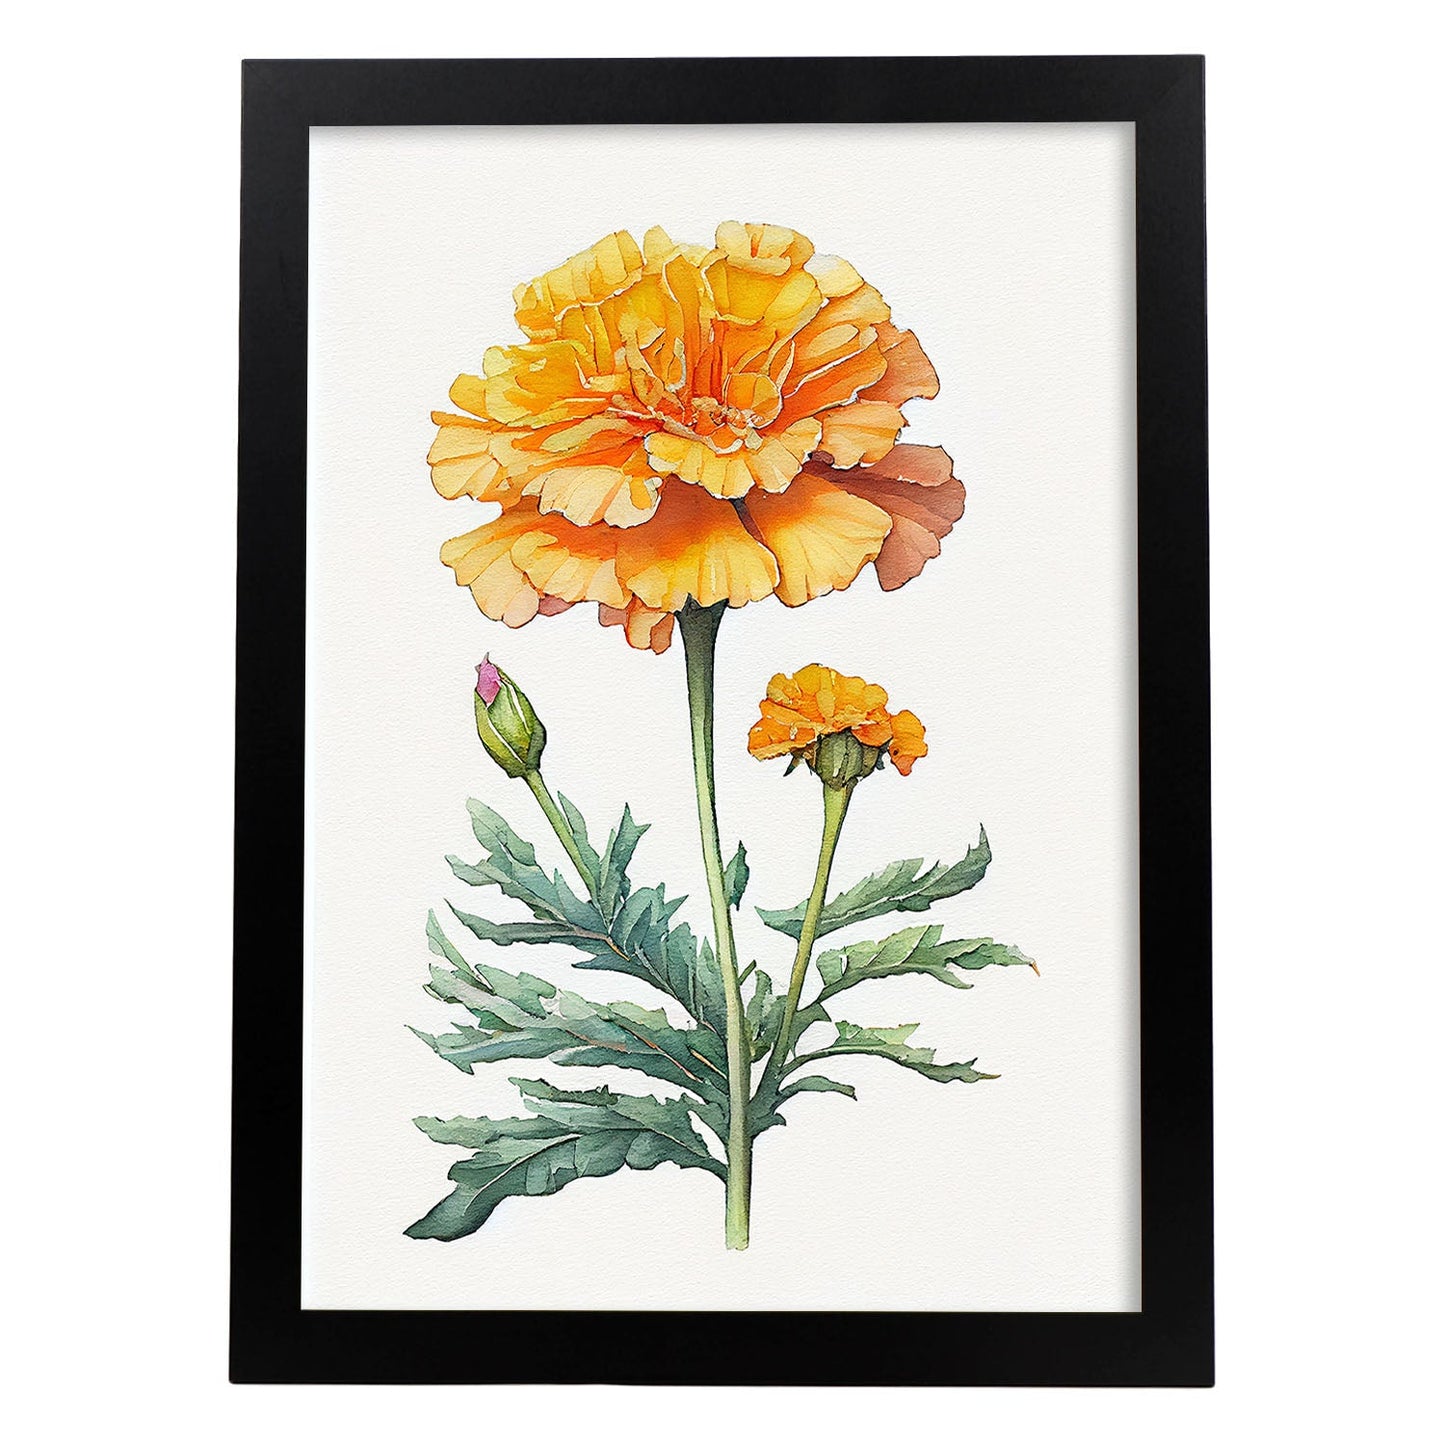 Nacnic watercolor minmal Marigold_3. Aesthetic Wall Art Prints for Bedroom or Living Room Design.